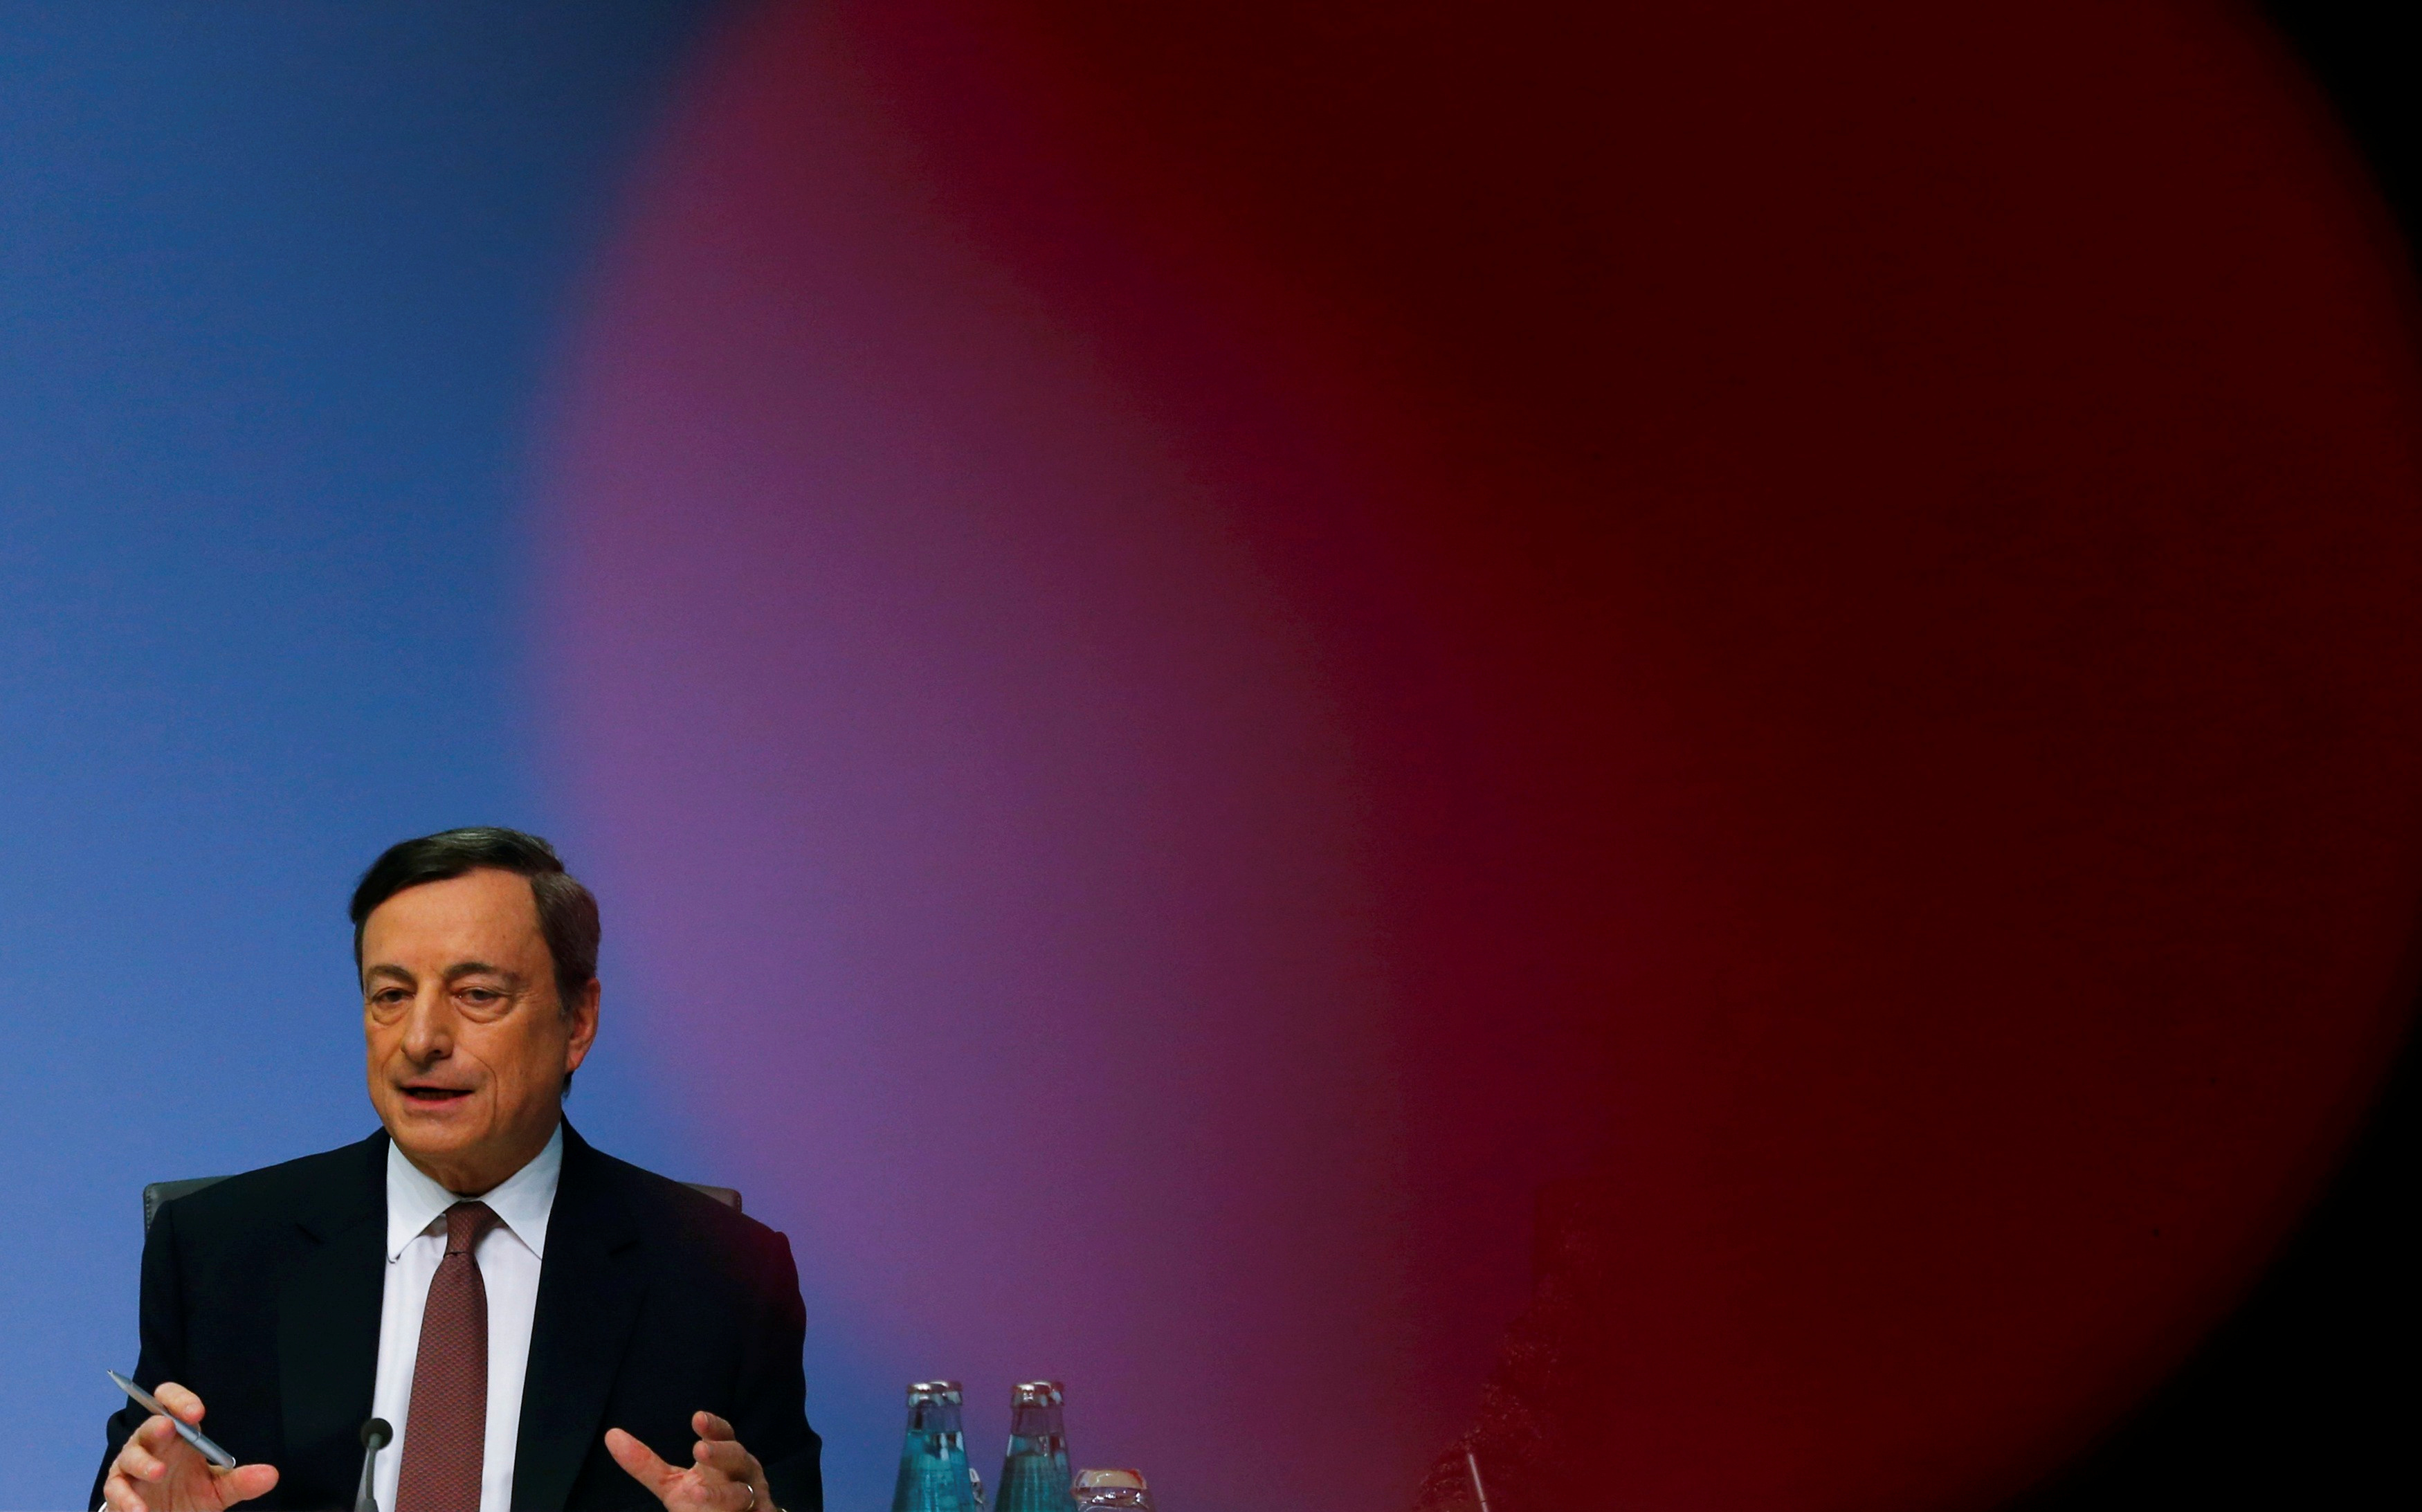 European Central Bank (ECB) President Draghi speaks during a news conference at the ECB headquarters in Frankfurt